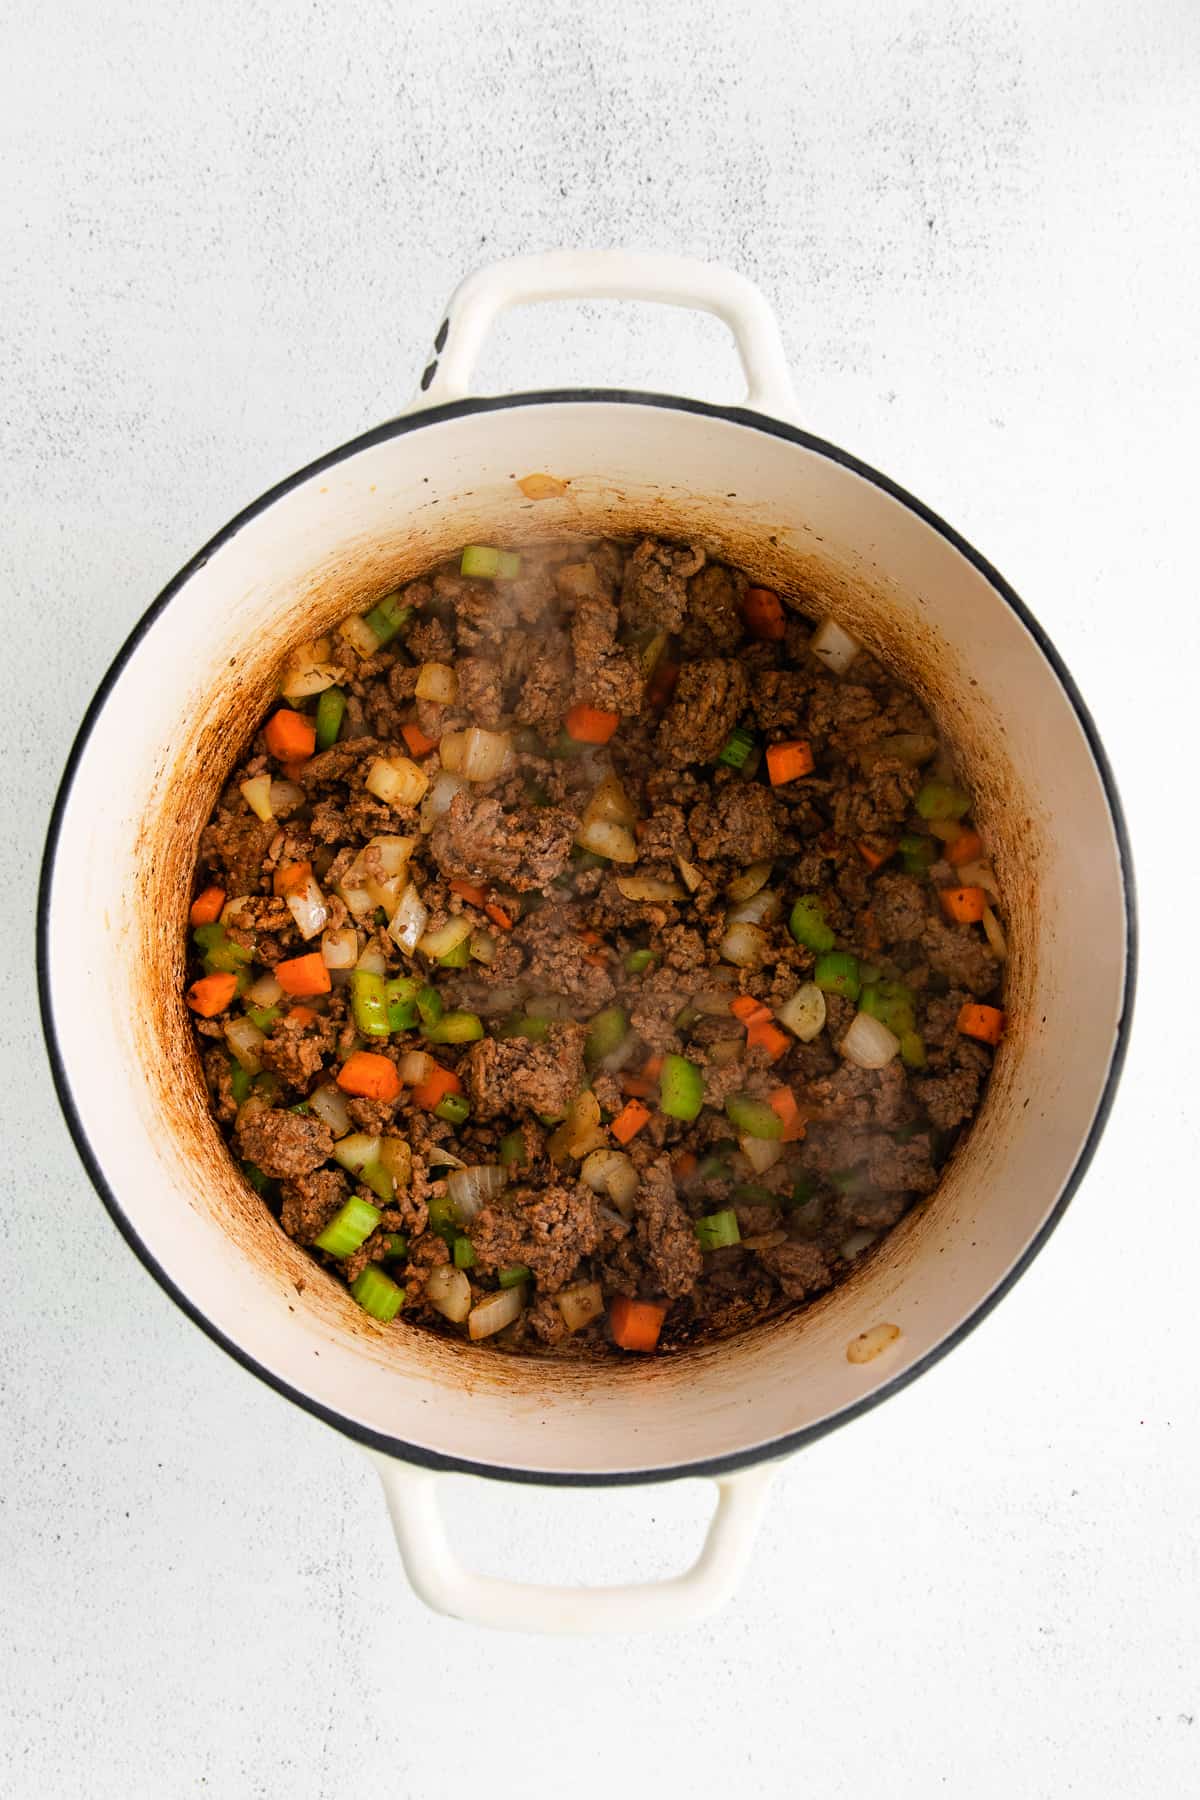 Sautéed ground beef in a dutch oven with veggies.